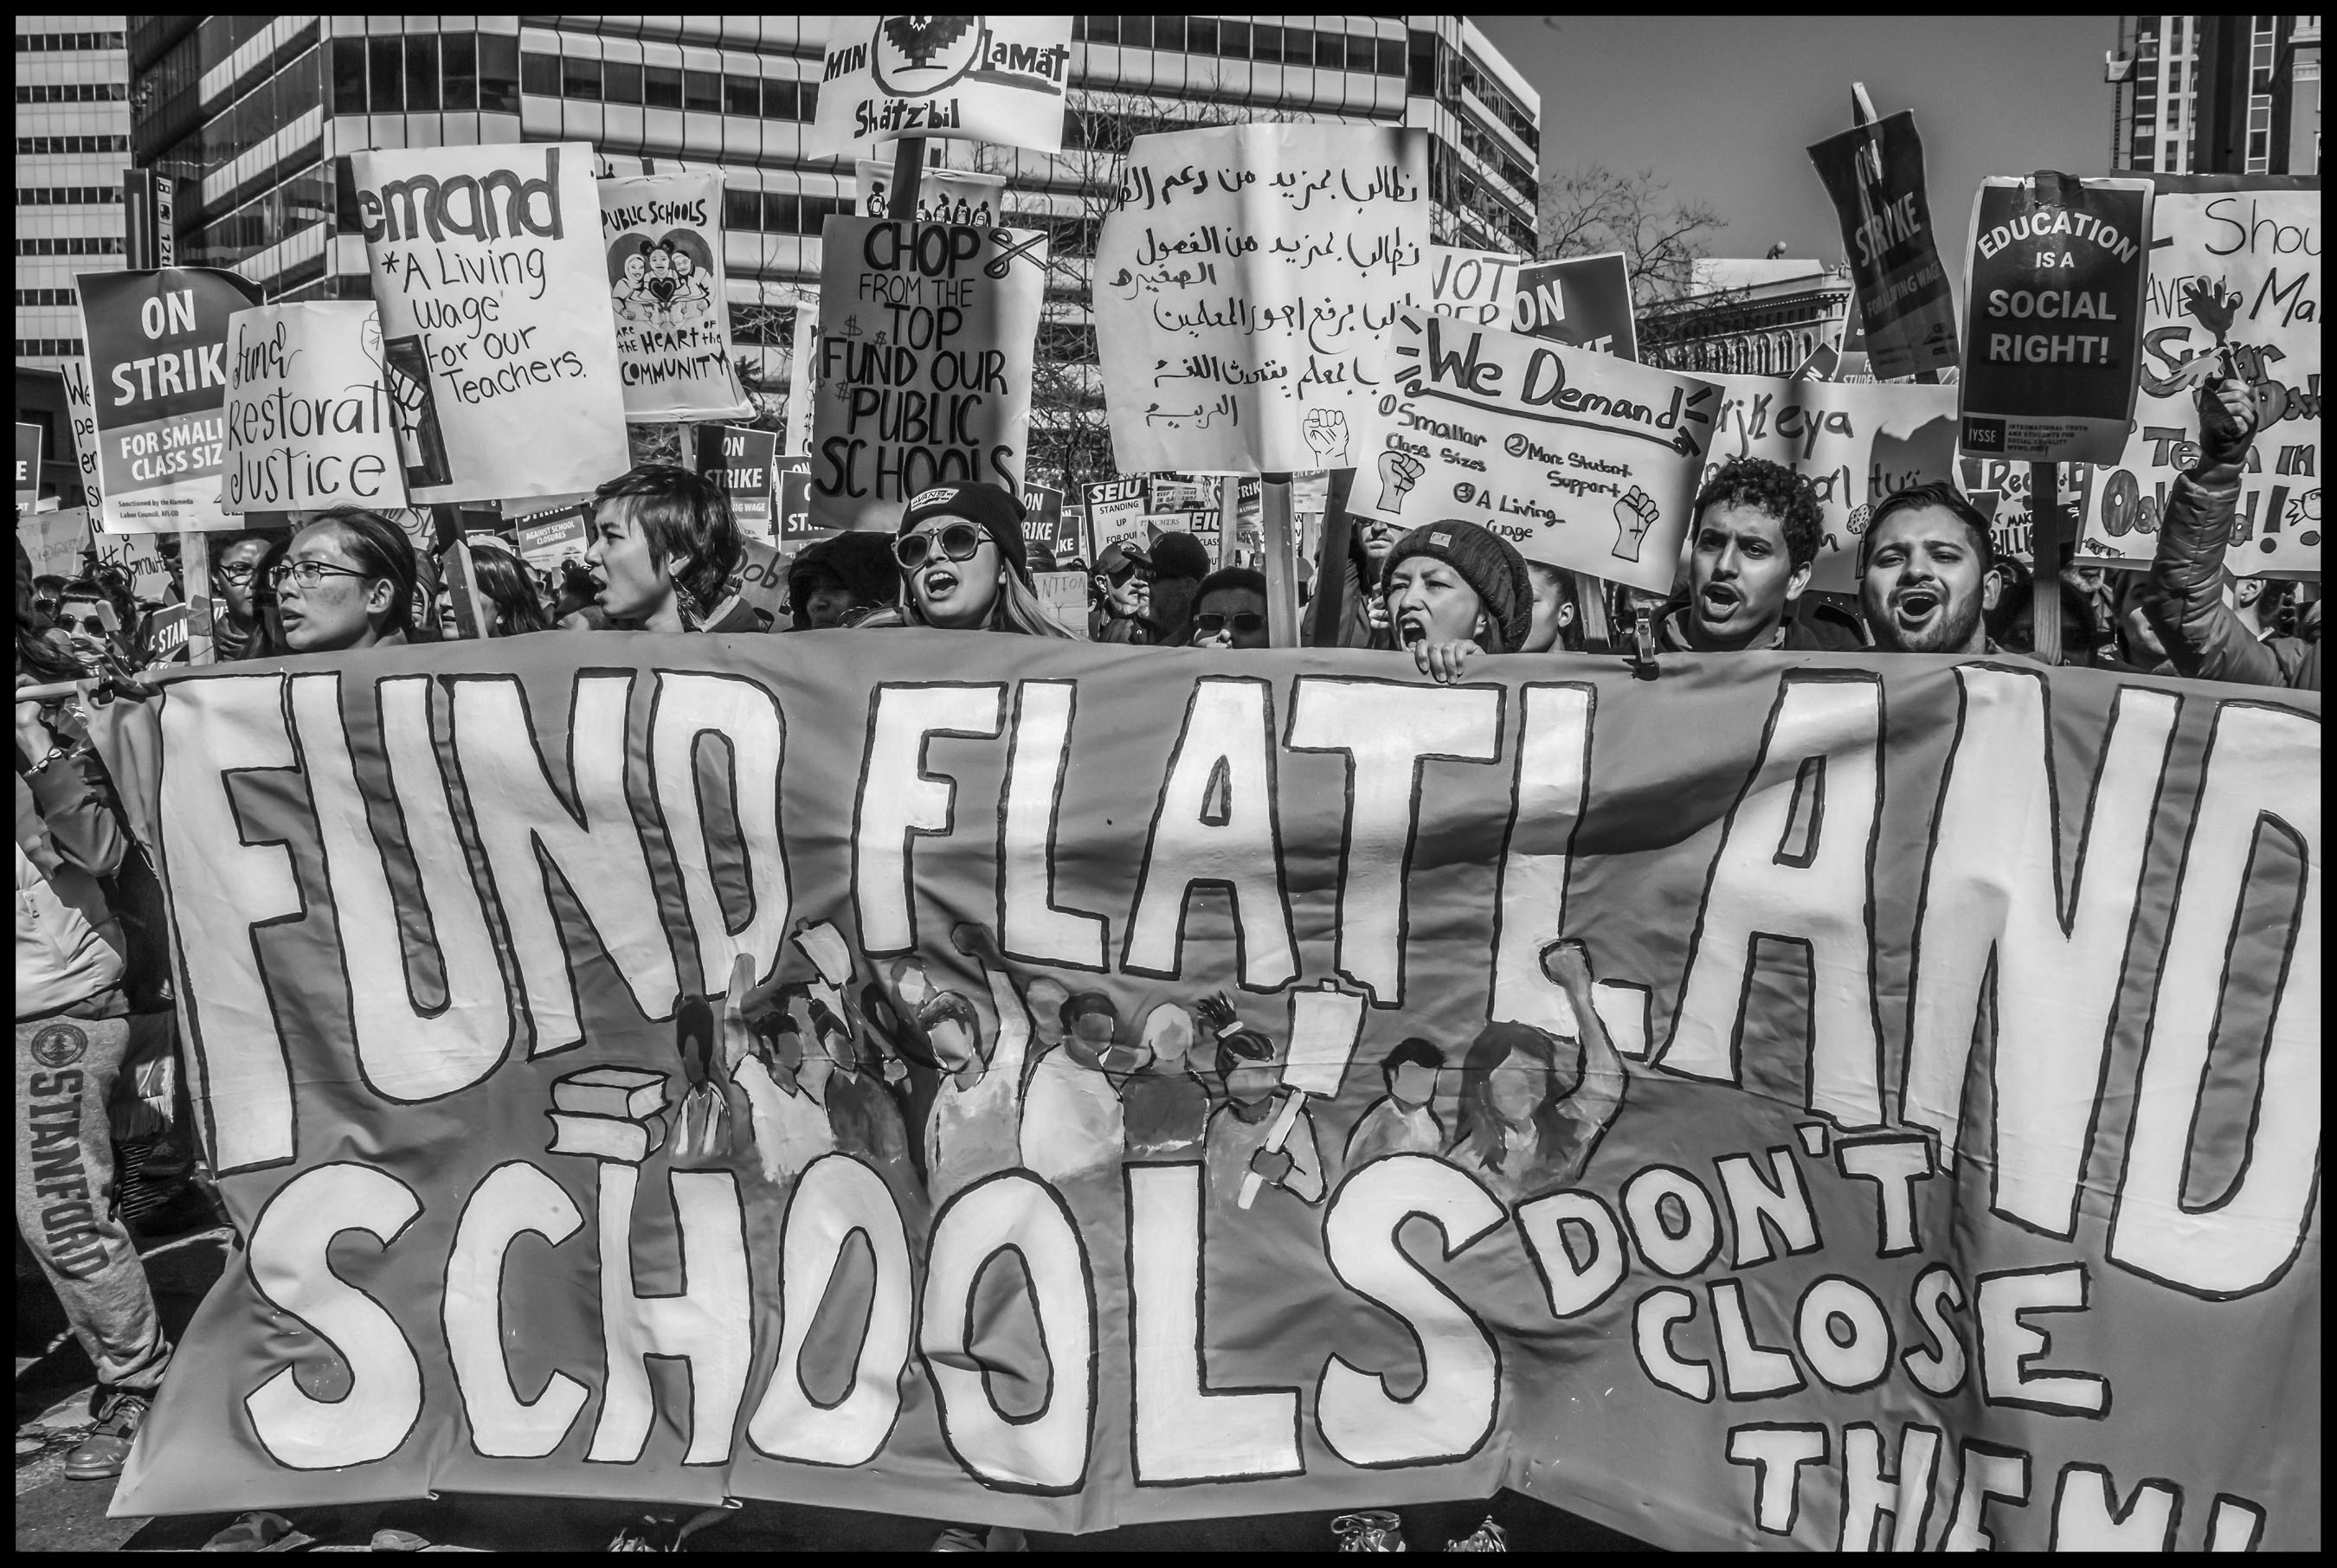 Teachers and community members march behind a banner opposing the closure of 24 schools, which targets schools in the Oakland flatlands, predominantly low-income communities of color.